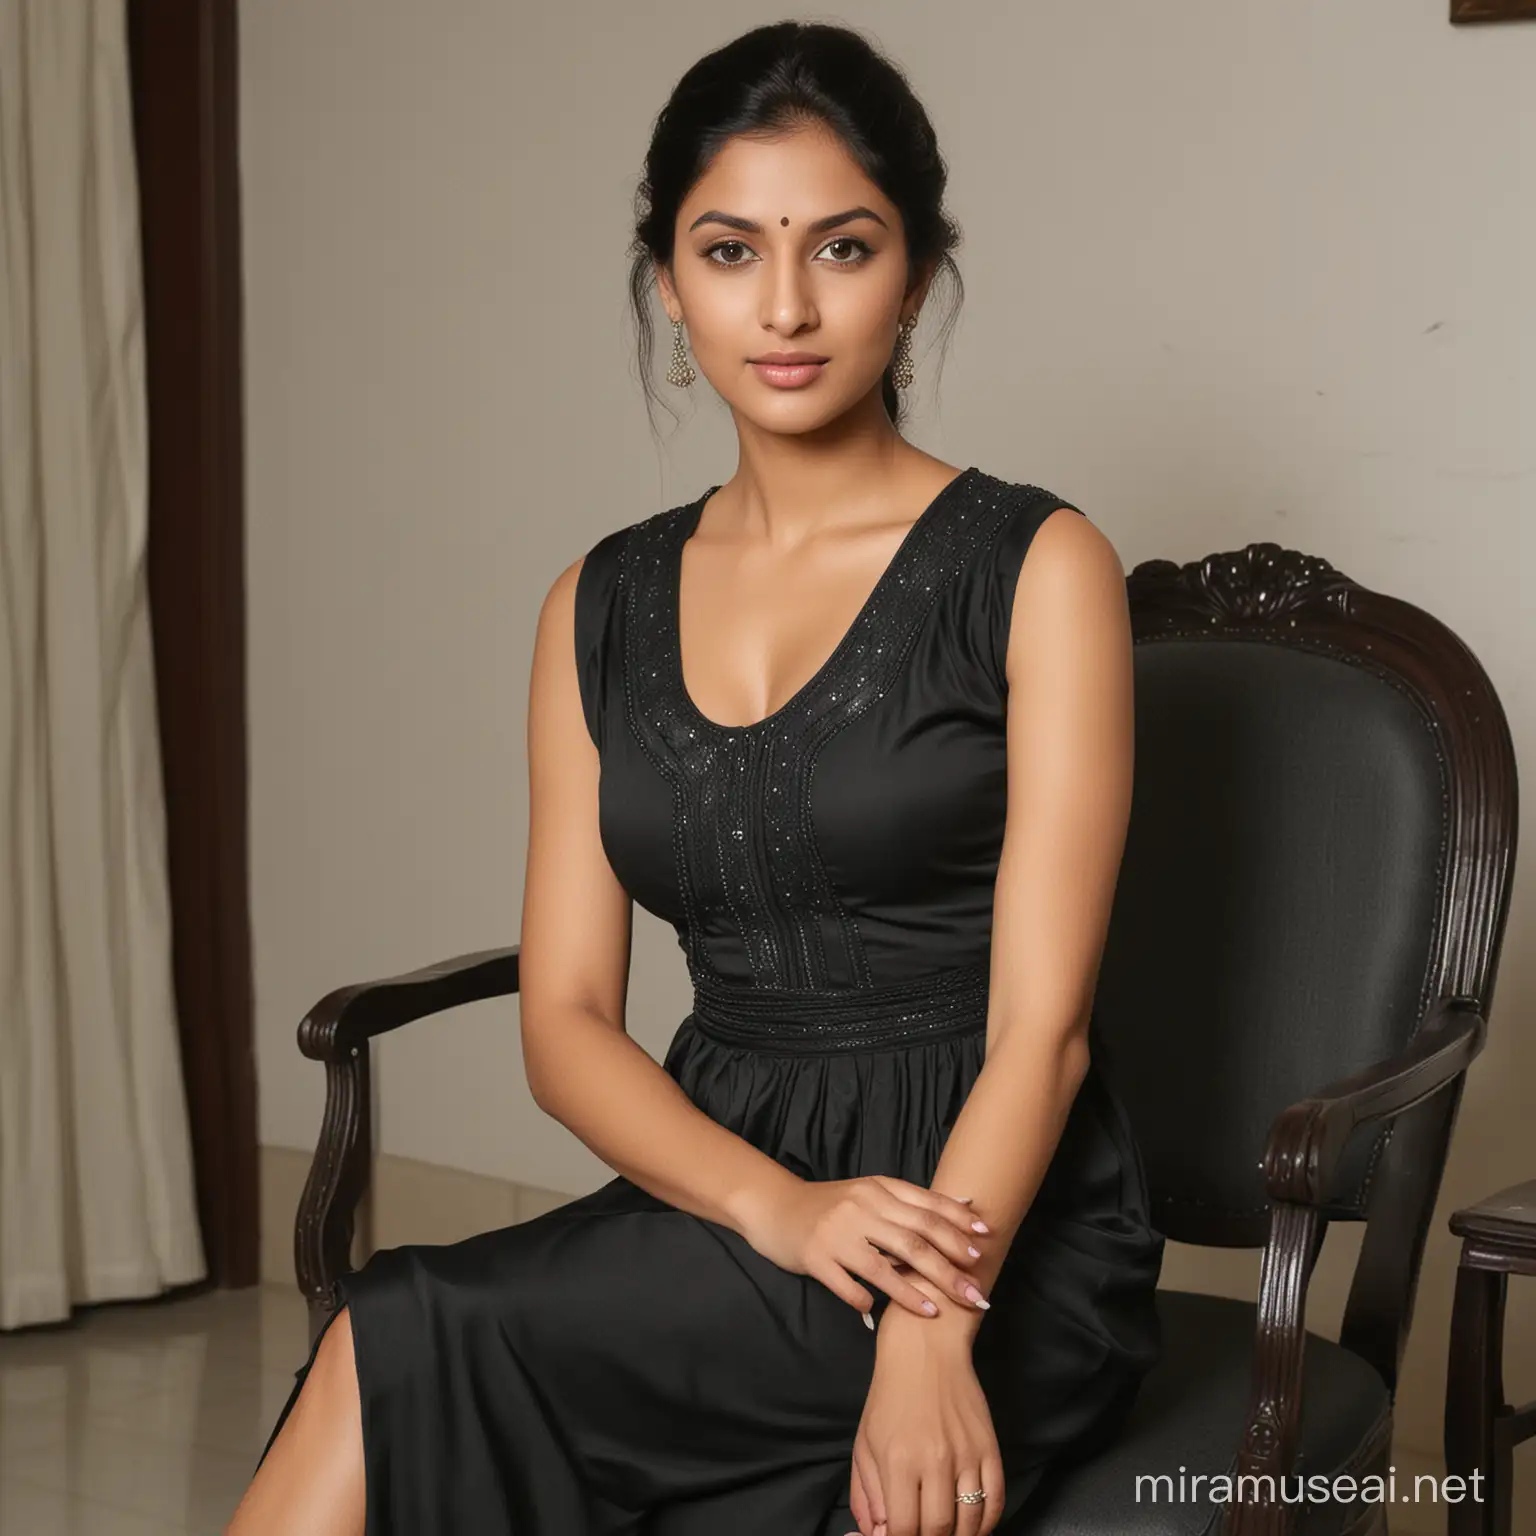 Hot white skinned Indian lady in a black dress sitting on a chair in room